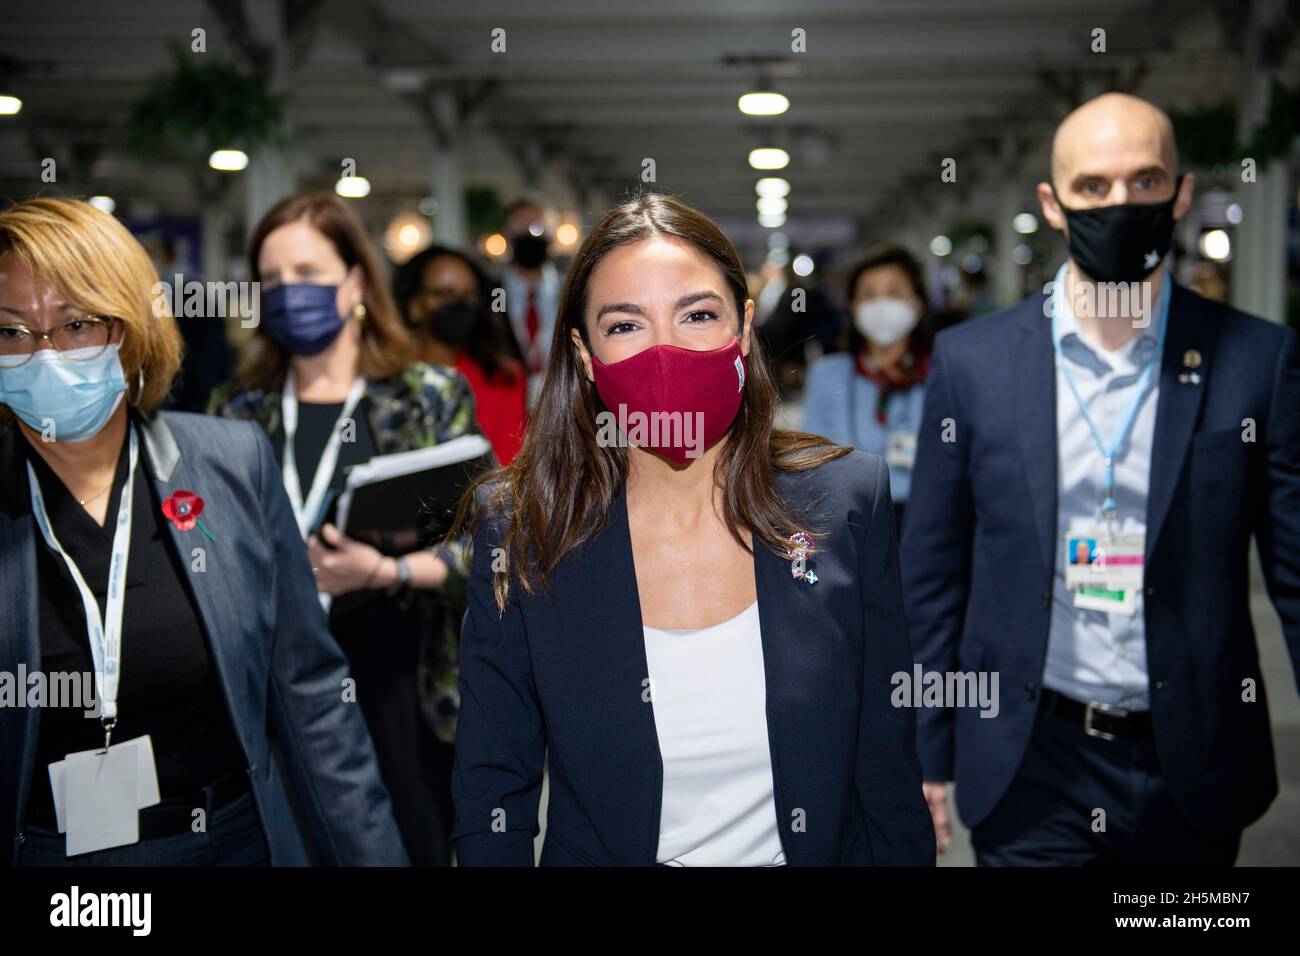 Glasgow, UK. 10th Nov, 2021. Glasgow, Scotland, UK. 10 November 2021PICTURED: Alexandria Ocasio-Cortez United States Representative seen in between meetings at the COP26 Climate Change Conference. Alexandria Ocasio-Cortez, also known by her initials AOC, is an American politician and activist. She has served as the U.S. Representative for New York's 14th congressional district since 2019, as a member of the Democratic Party. Credit: Colin Fisher/Alamy Live News Stock Photo